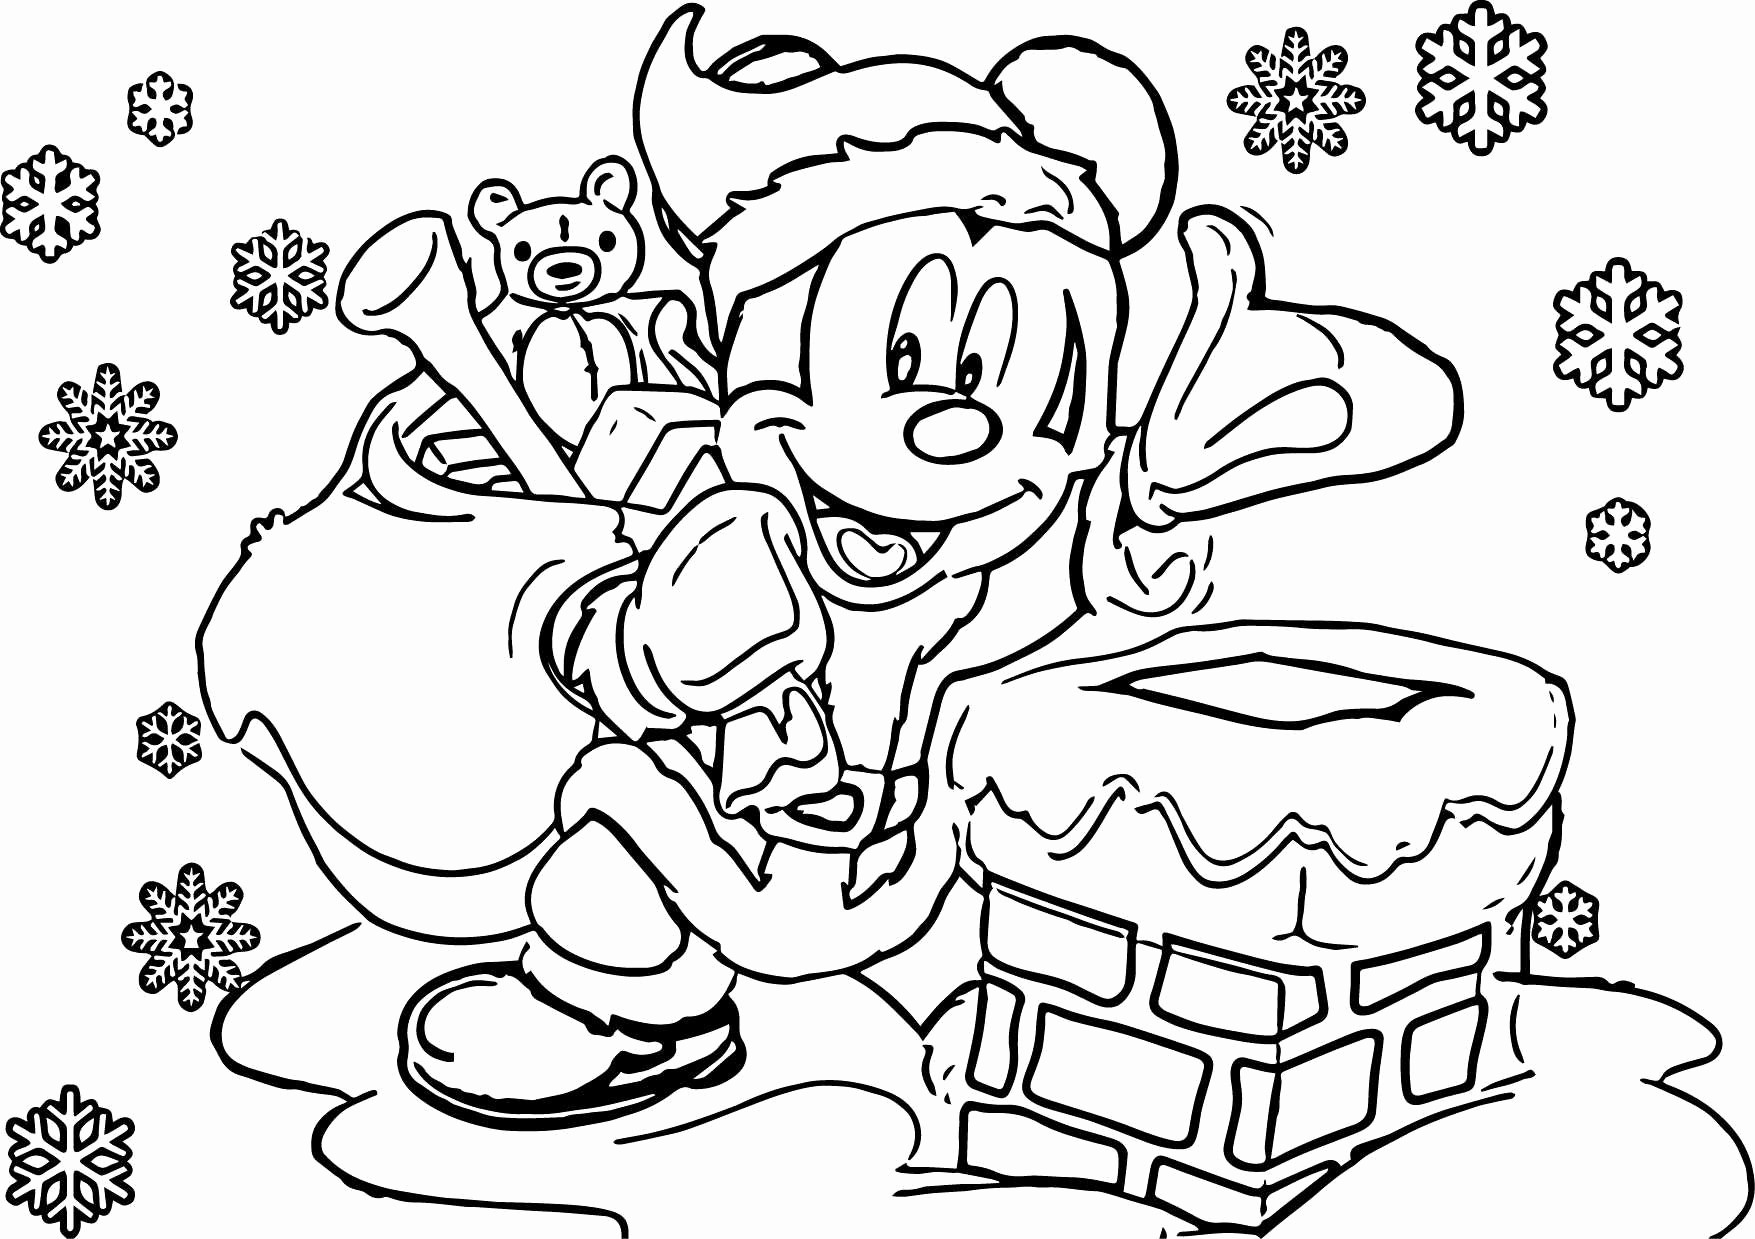 Christmas Color Pages For Kids Coloring Ideas Unique Christmas Coloring Pages For Kids